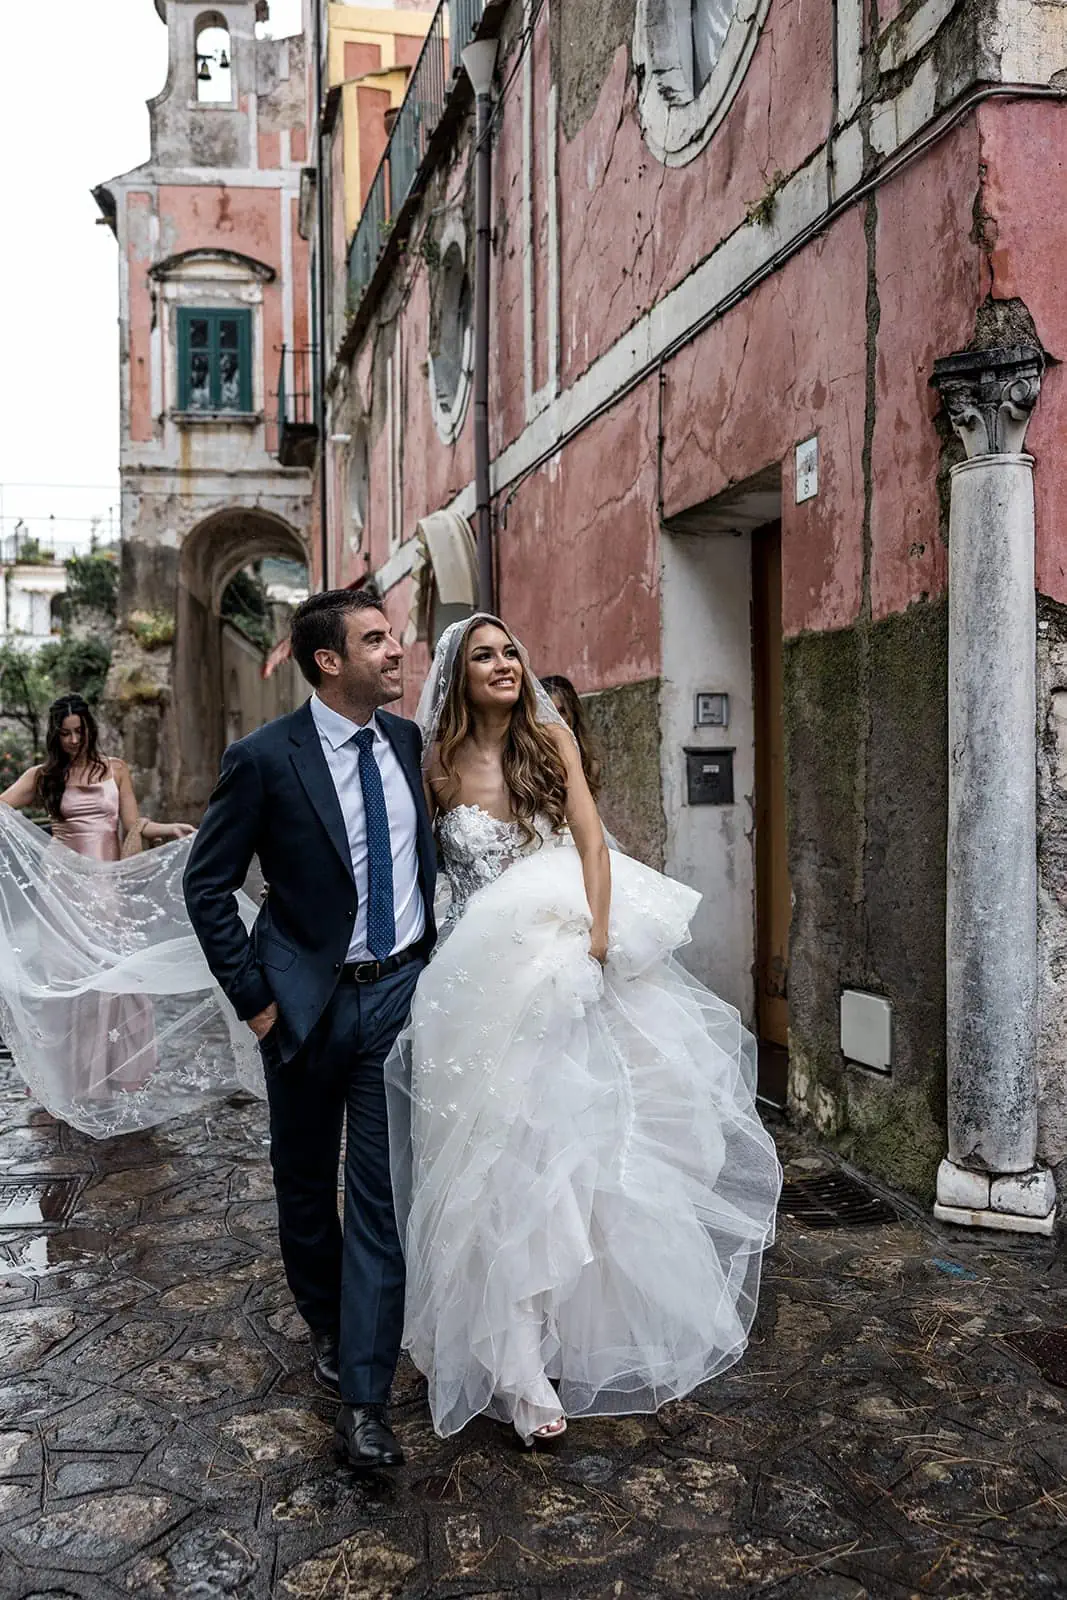 Bride and groom walk in streets of Ravello Italy after wedding